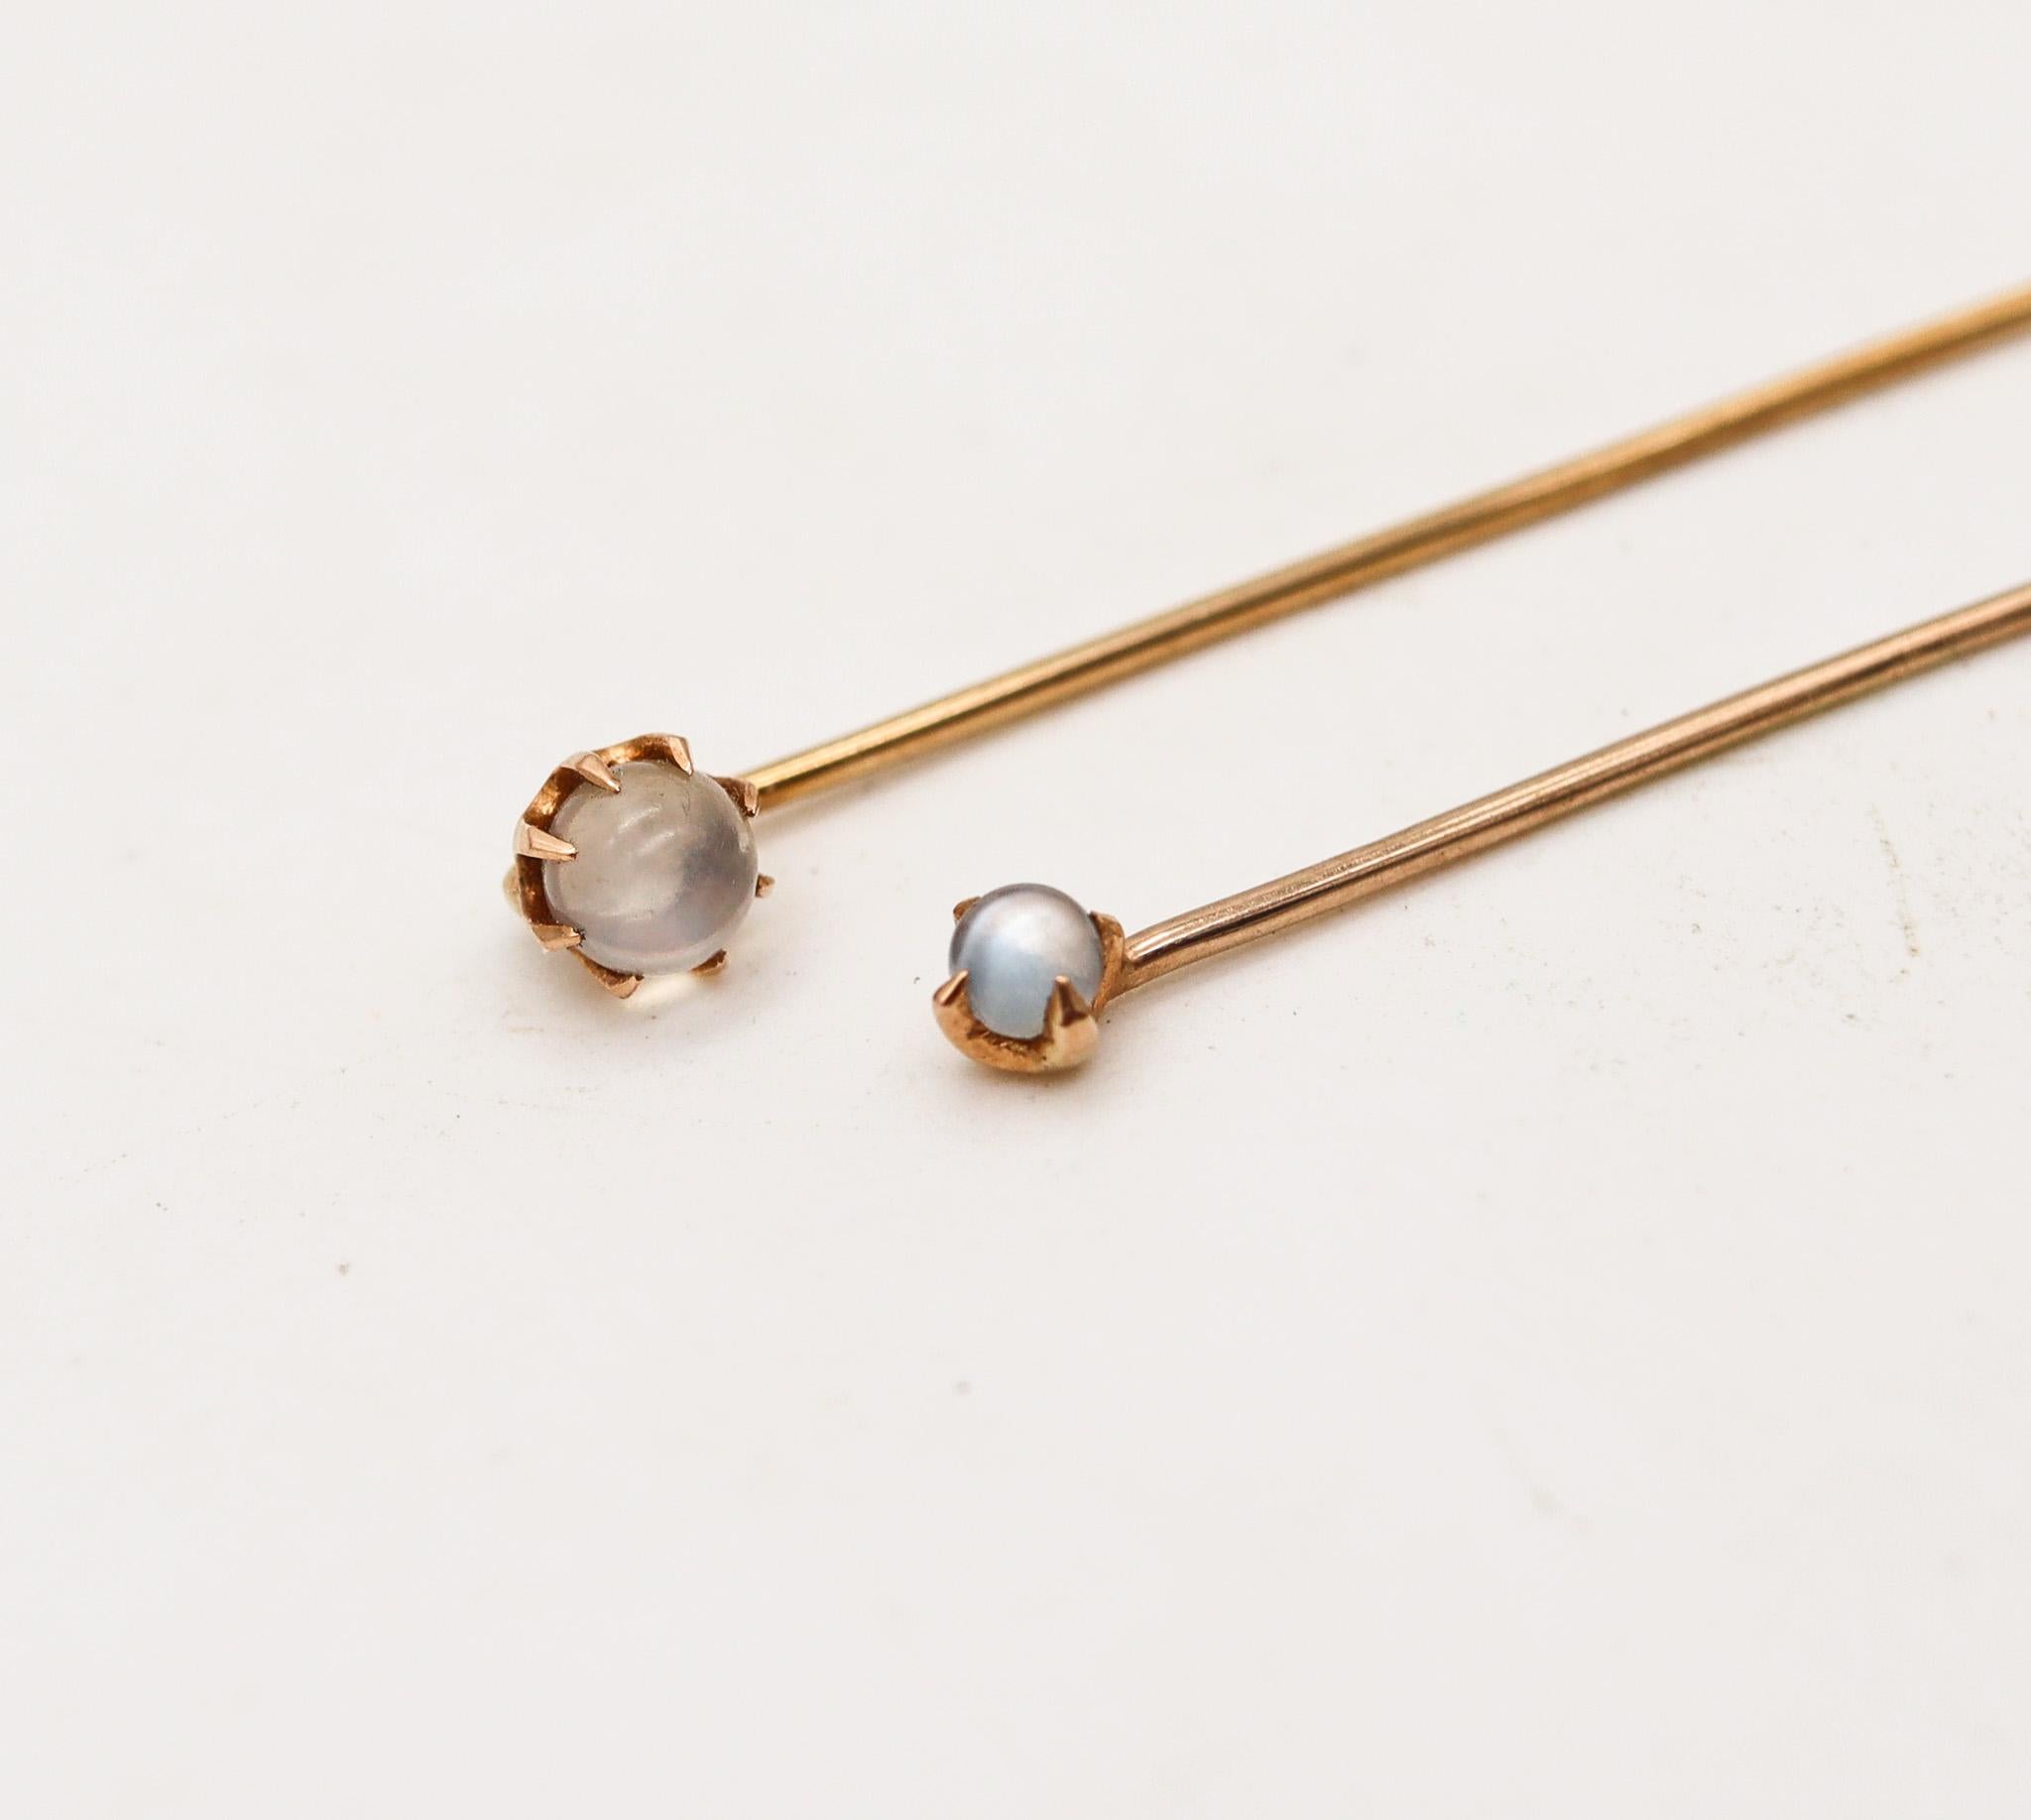 Edwardian 1910 Pair of Stick Pins In 14Kt Yellow Gold with Cat's Eye Moonstones In Excellent Condition For Sale In Miami, FL